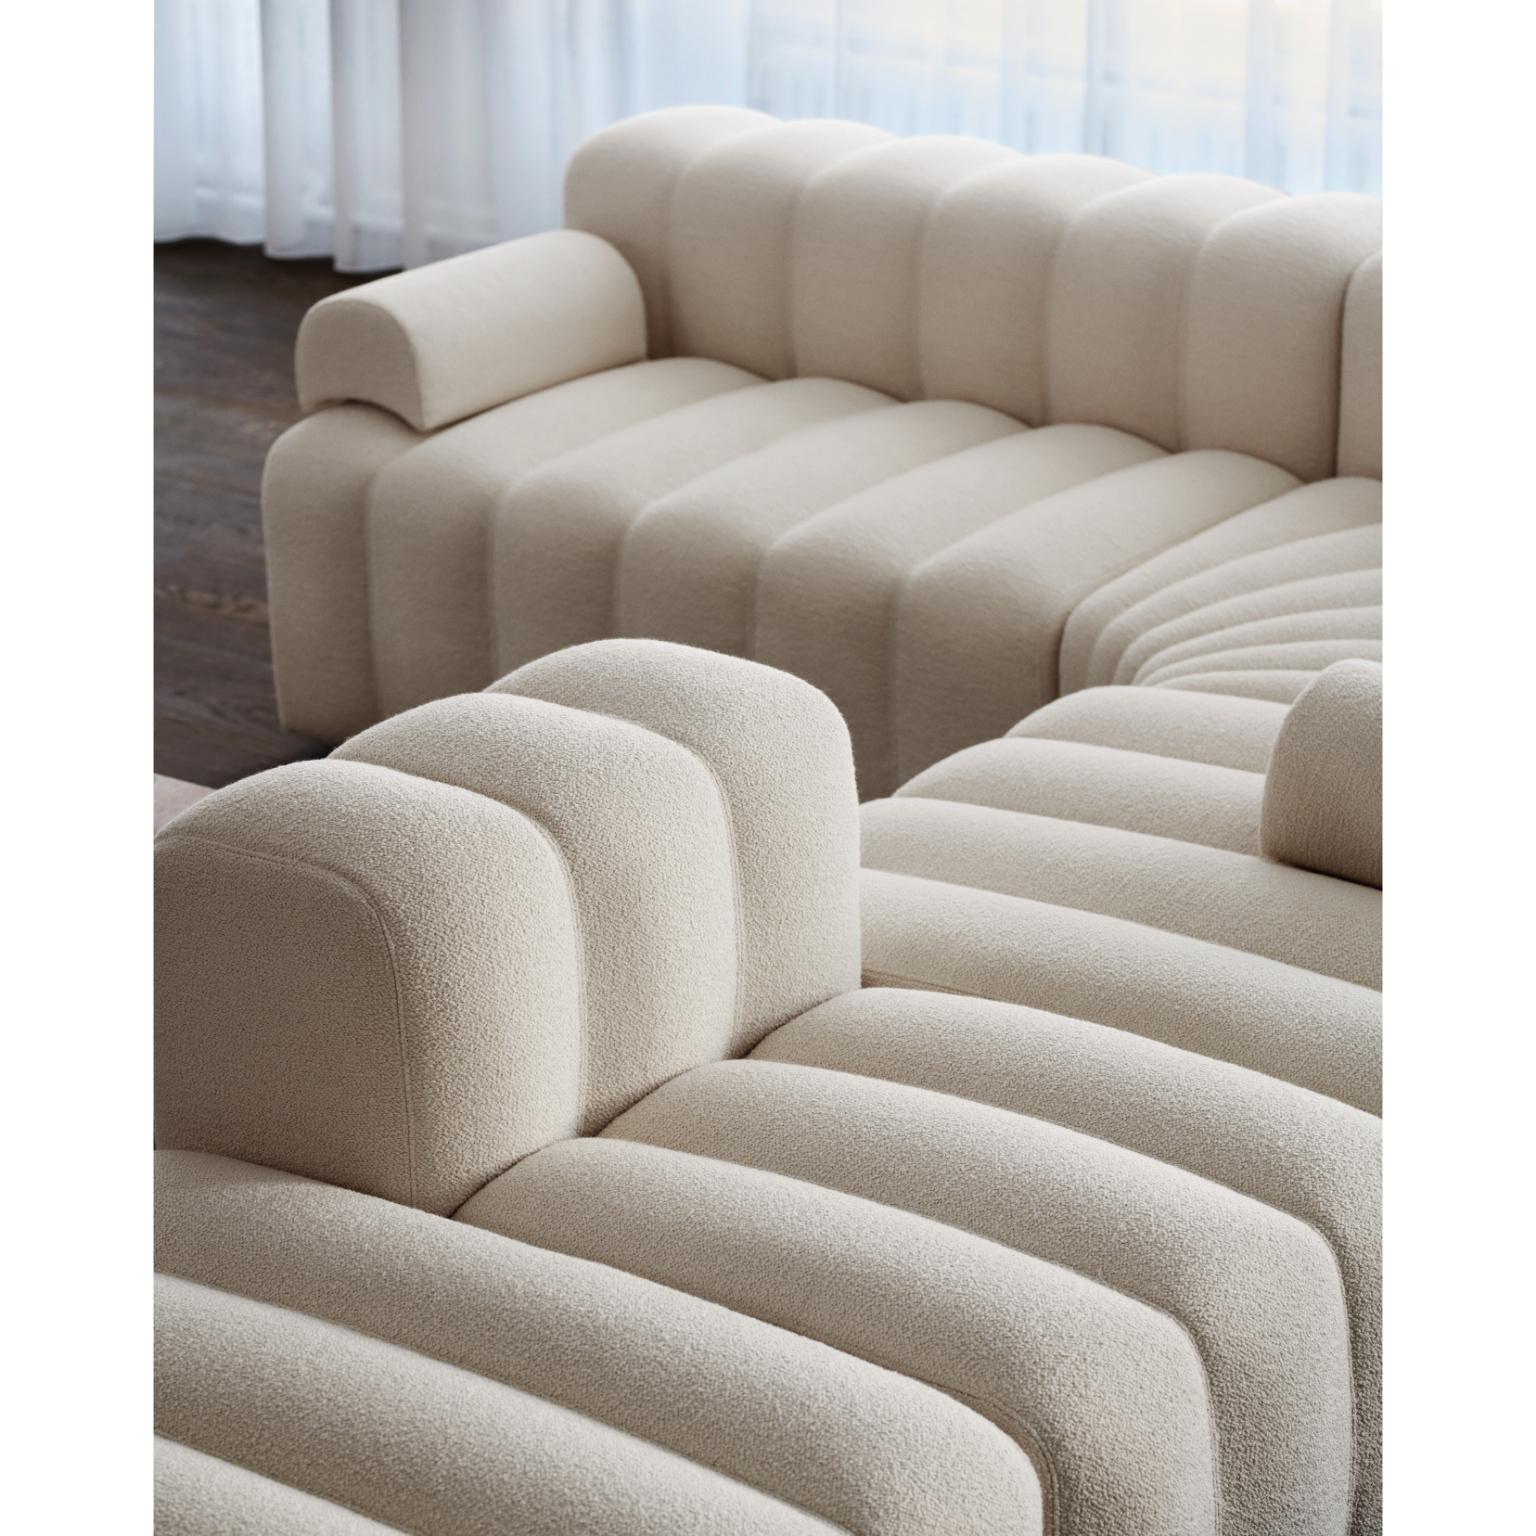 Studio Lounge Large Left Modular Sofa With Short Armrest by NORR11
Dimensions: D 130 x W 153 x H 70 cm. SH 47 cm. 
Materials: Foam, wood and upholstery.
Upholstery: Barnum Boucle Color 3.

Available in different upholstery options. A plywood